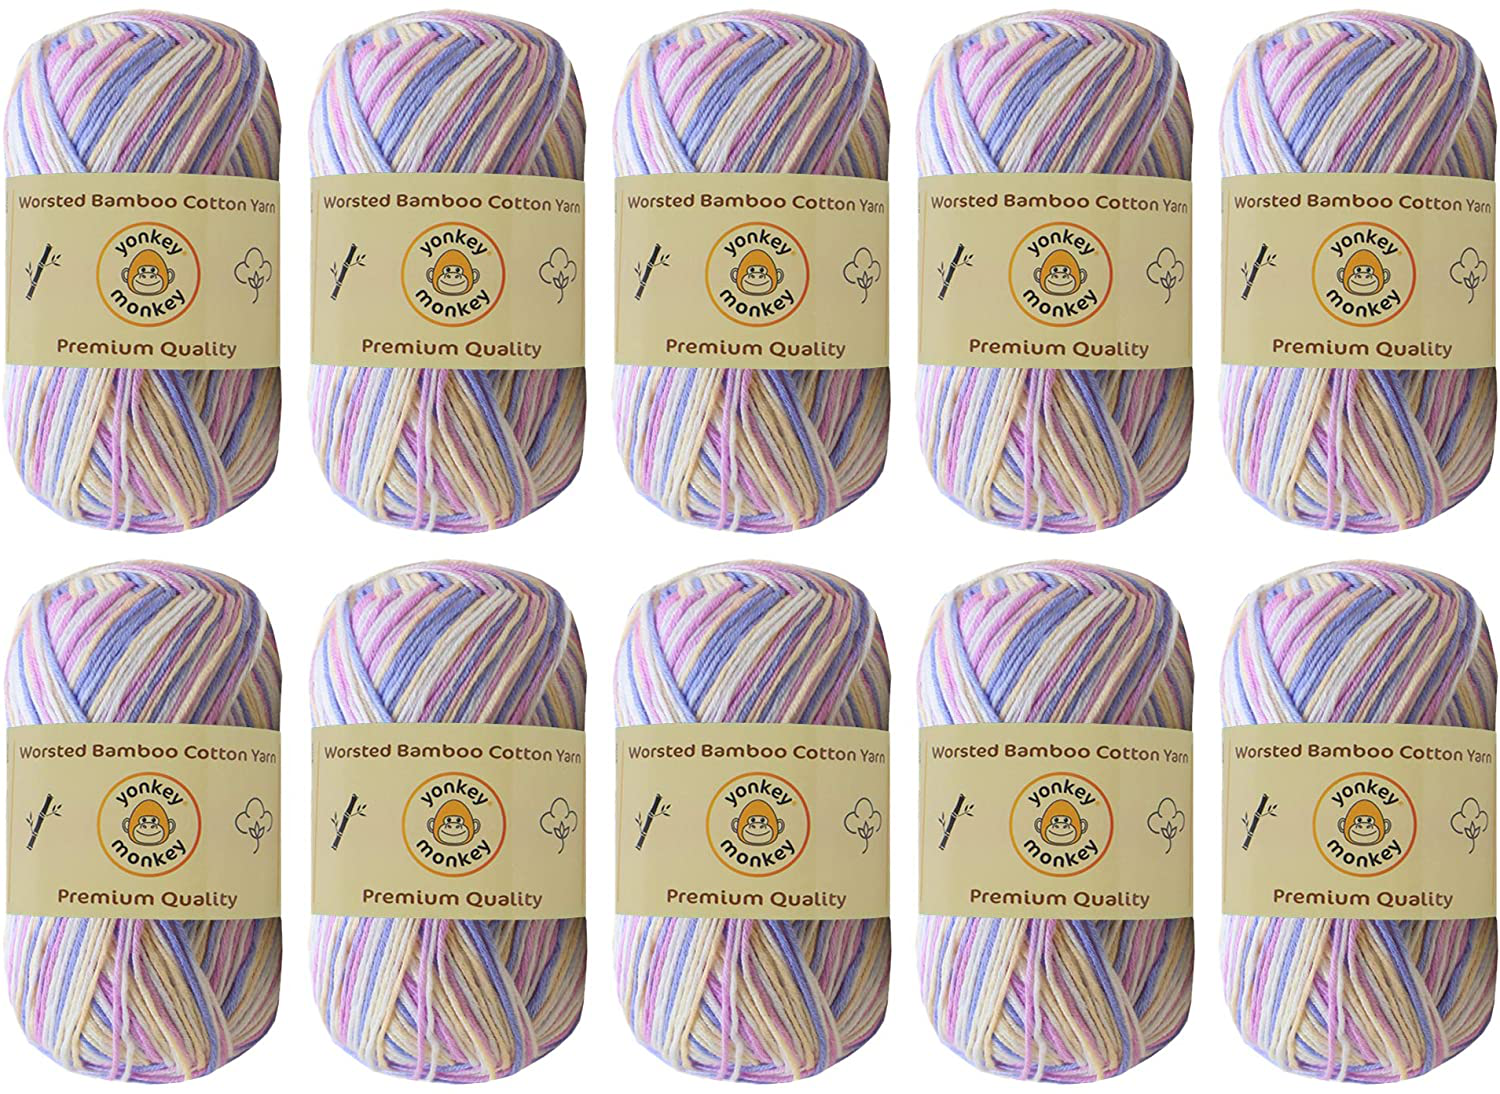 10-Pack Yonkey Monkey Skein Tencel Yarn - 70% Bamboo, 30% Cotton - Softest Quality Crocheting, Knitting Supplies - Lightweight and Breathable Fabric Threads 210 Meters